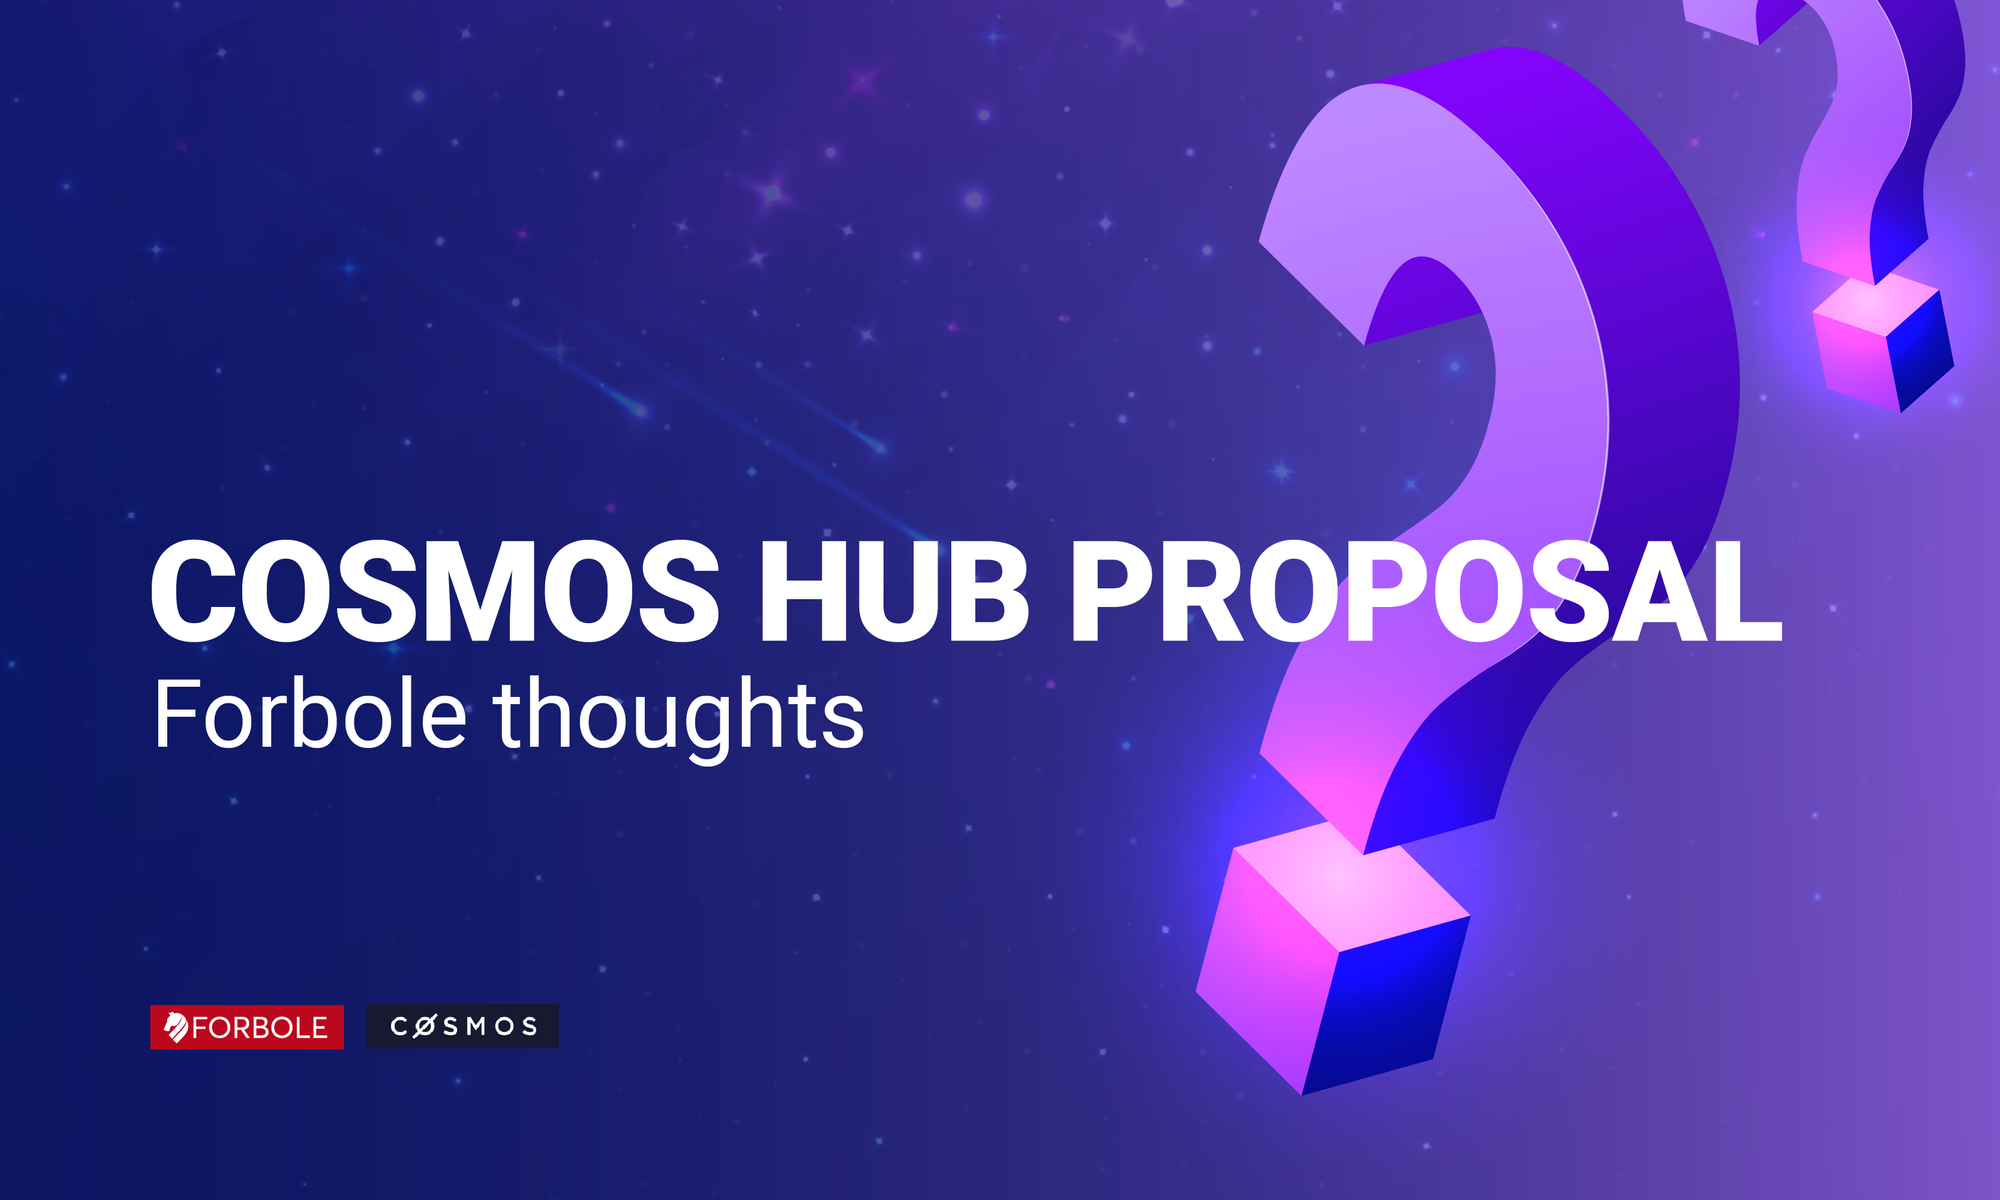 Forbole has voted “no” to proposal 47 on Cosmos Hub